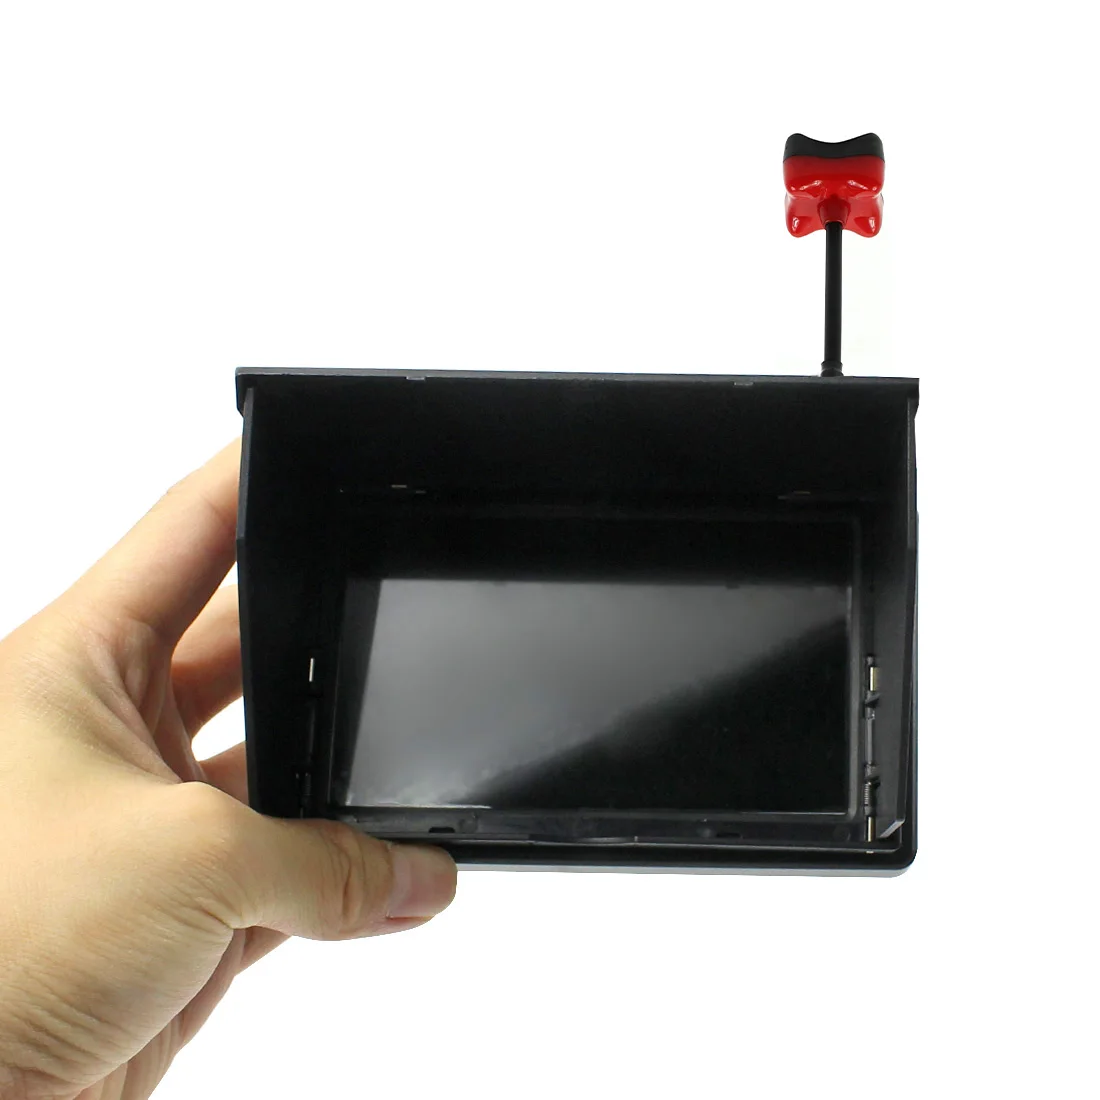 

JMT 5.8G 48CH 4.3 Inch LCD Screen FPV Reciever Monitor With FPV Antenna RP-SMA for FPV Racing Drone Quadcopter